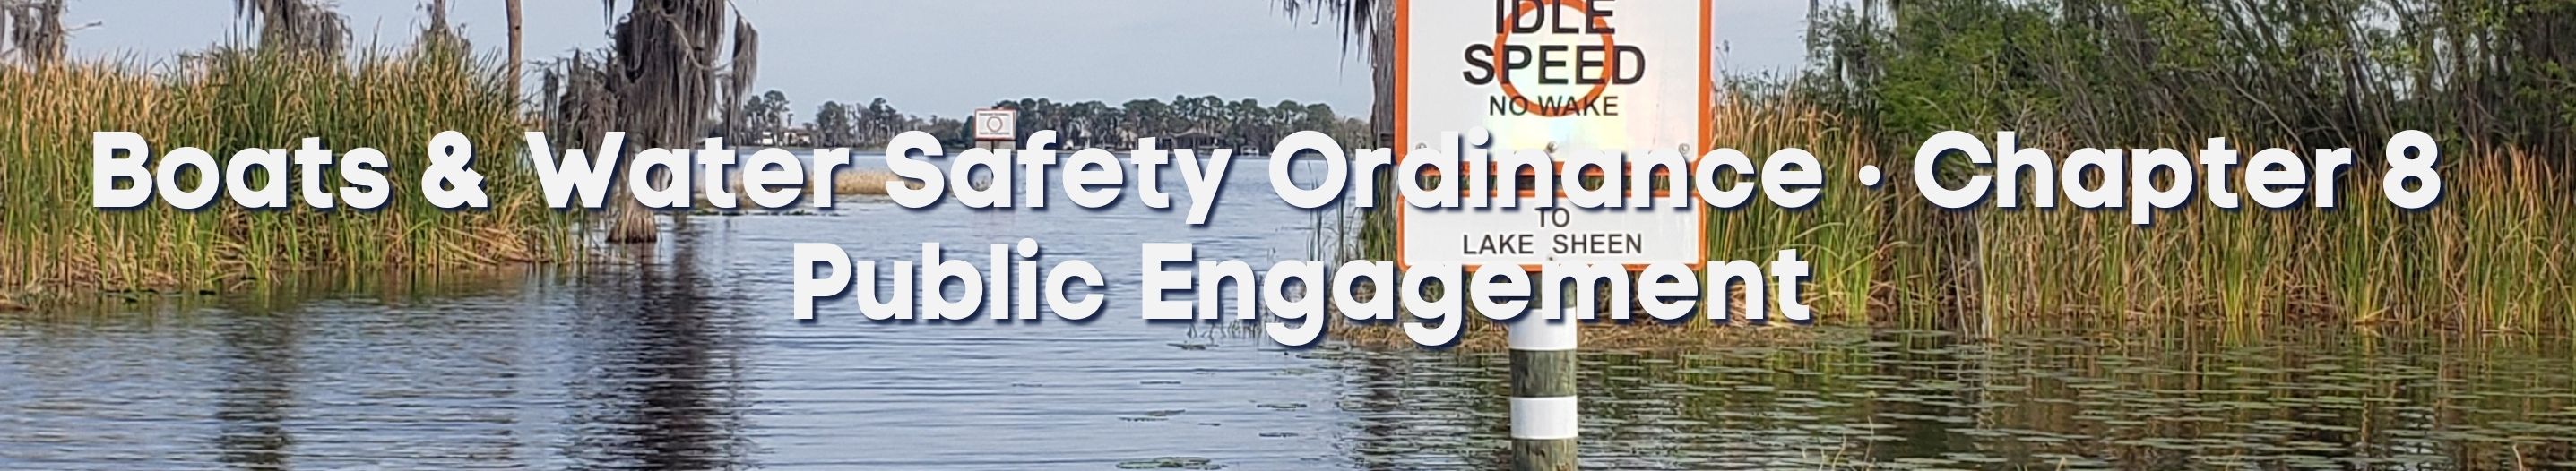 Boats and Water Safety Ordinance. Chapter 8 - Public Engagement